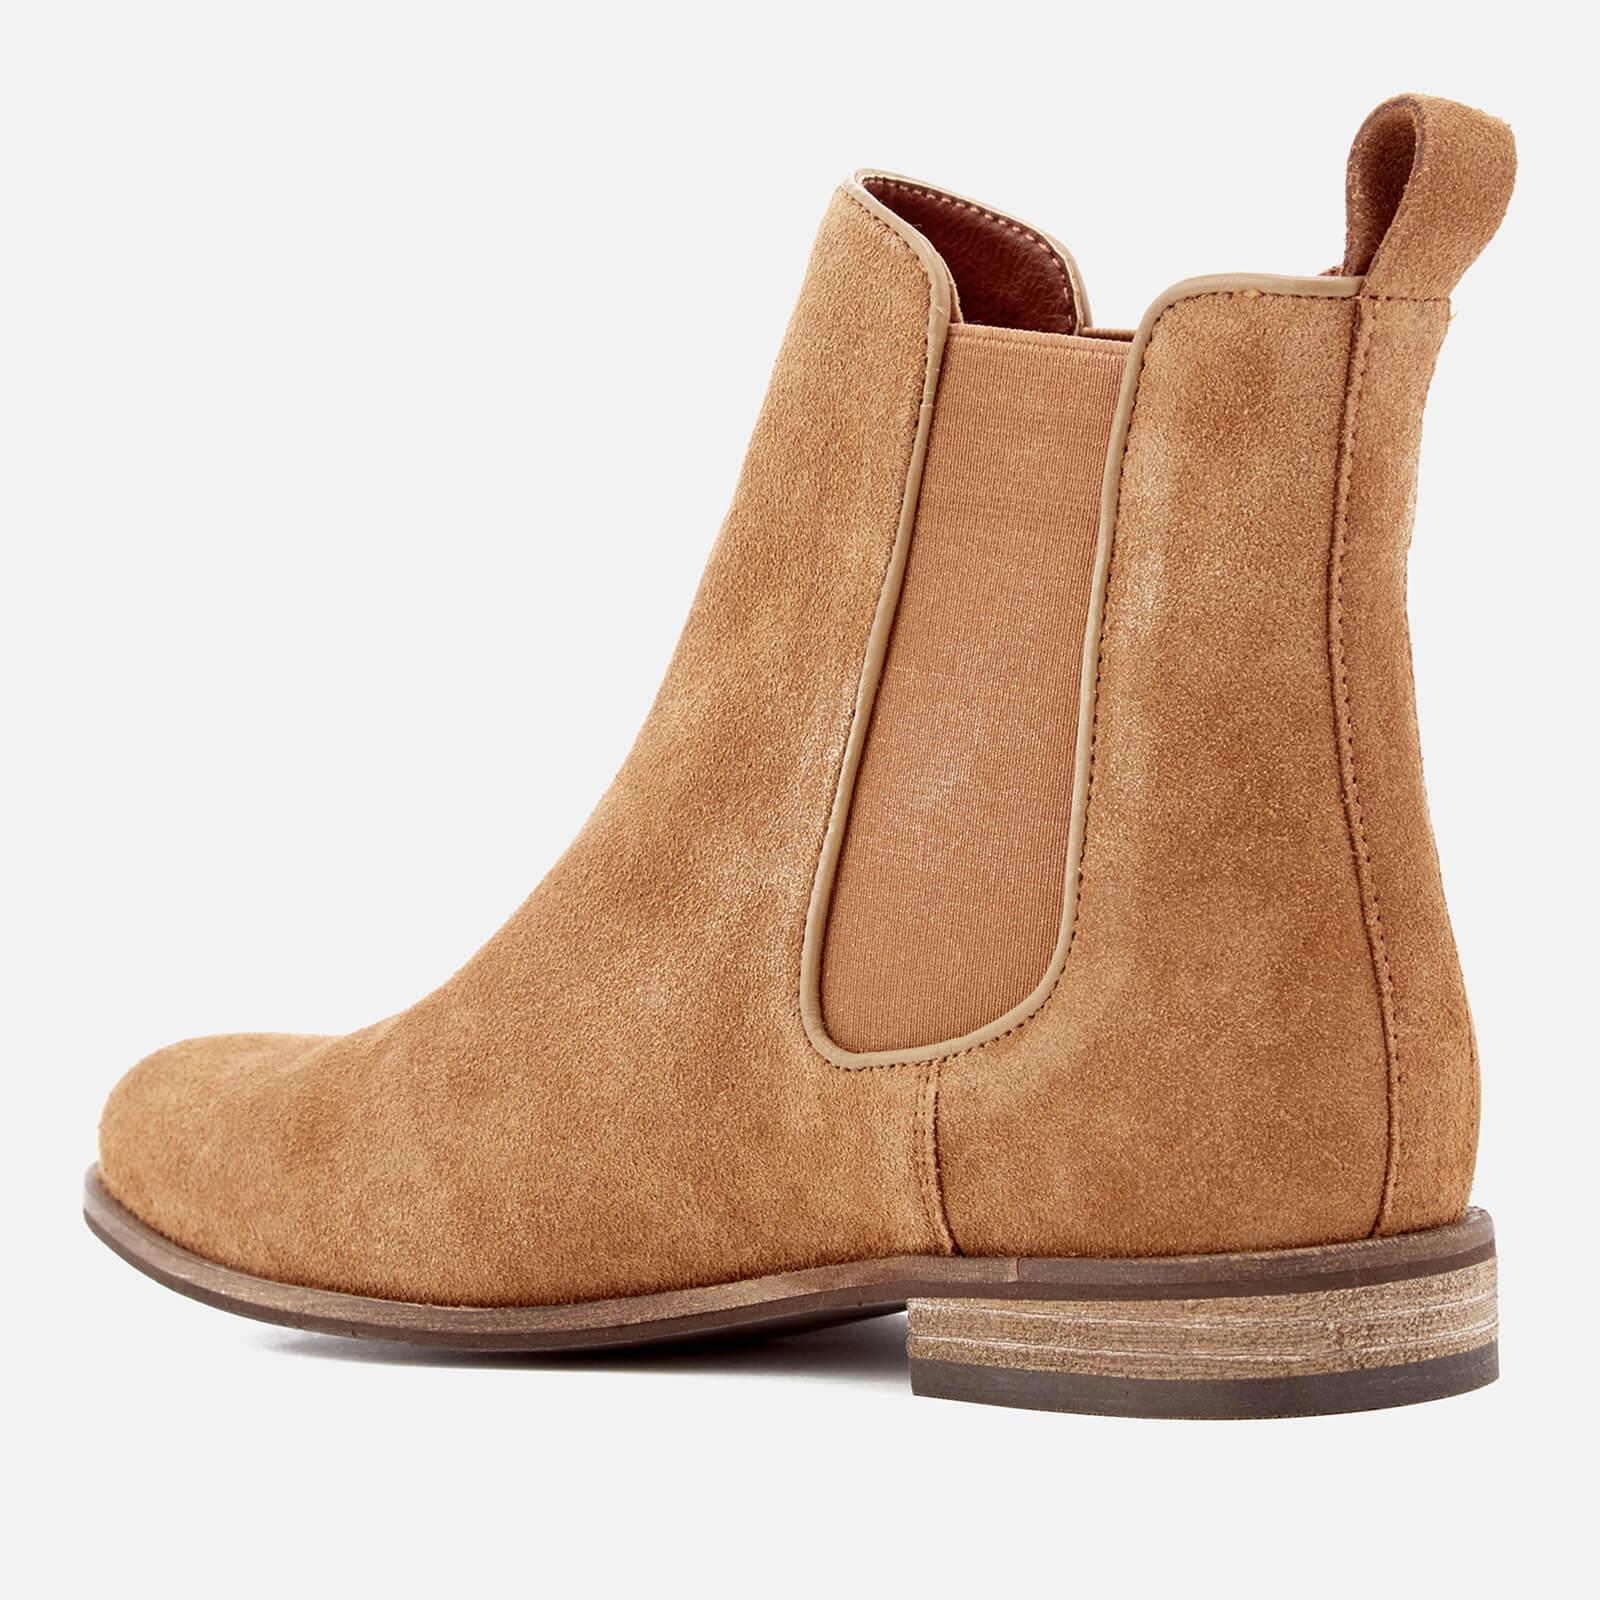 Superdry Women's Millie Suede Chelsea Boots in Tan (Brown) - Lyst